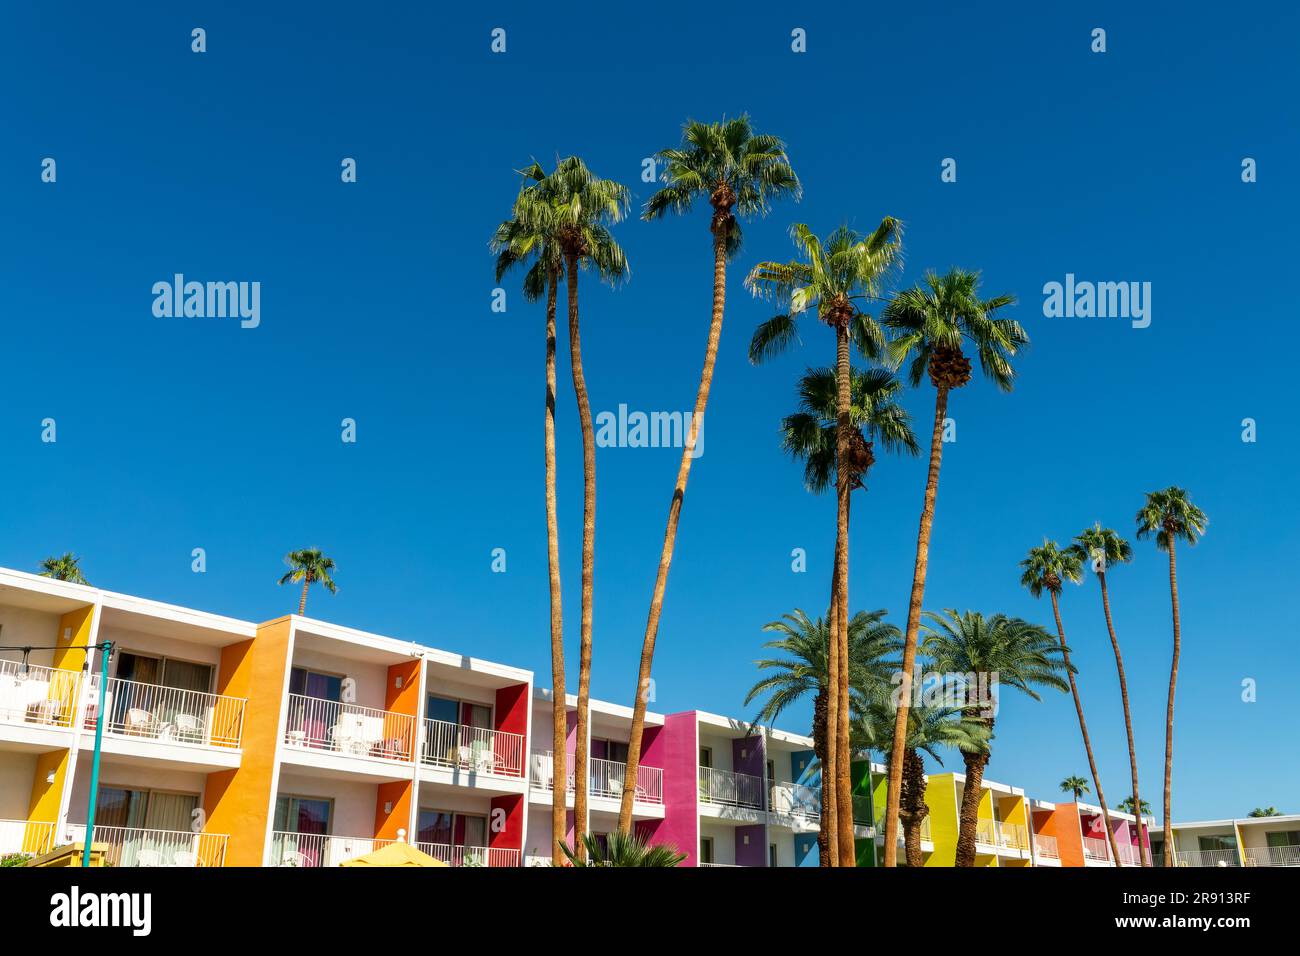 Saguaro hotel, palm trees and colorful architecture in Palm Springs, California Stock Photo